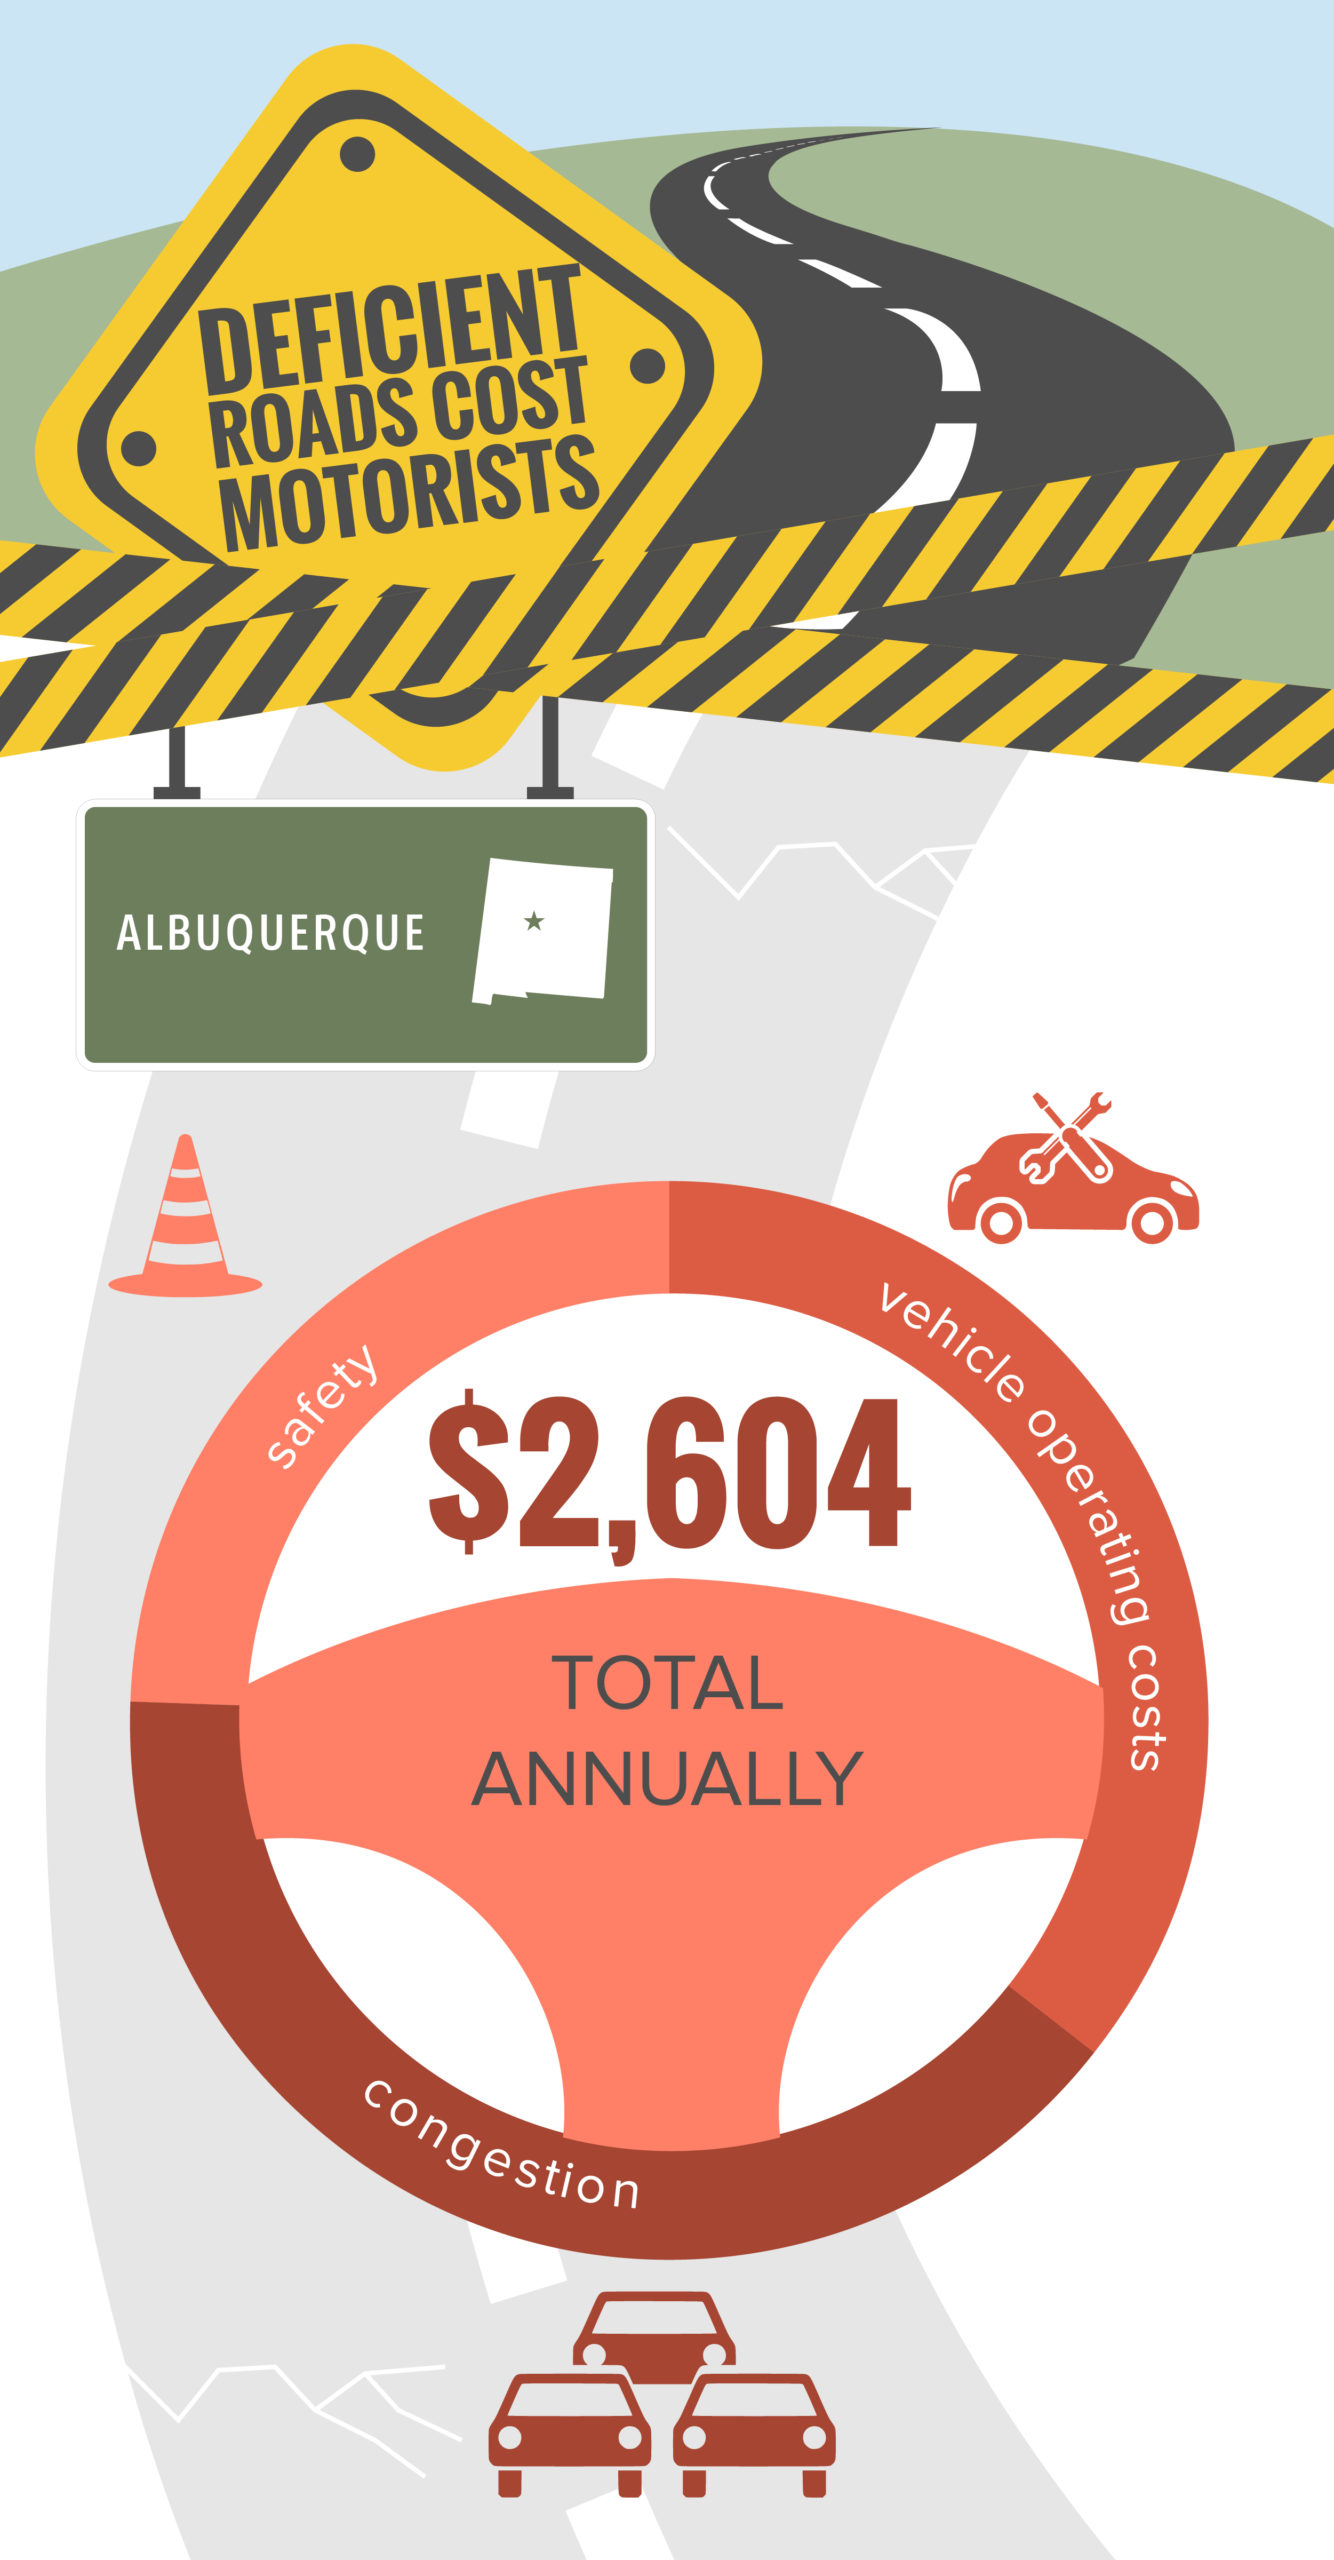 Albuquerque Deficient Roads Cost to Motorists Infographic – January 2022